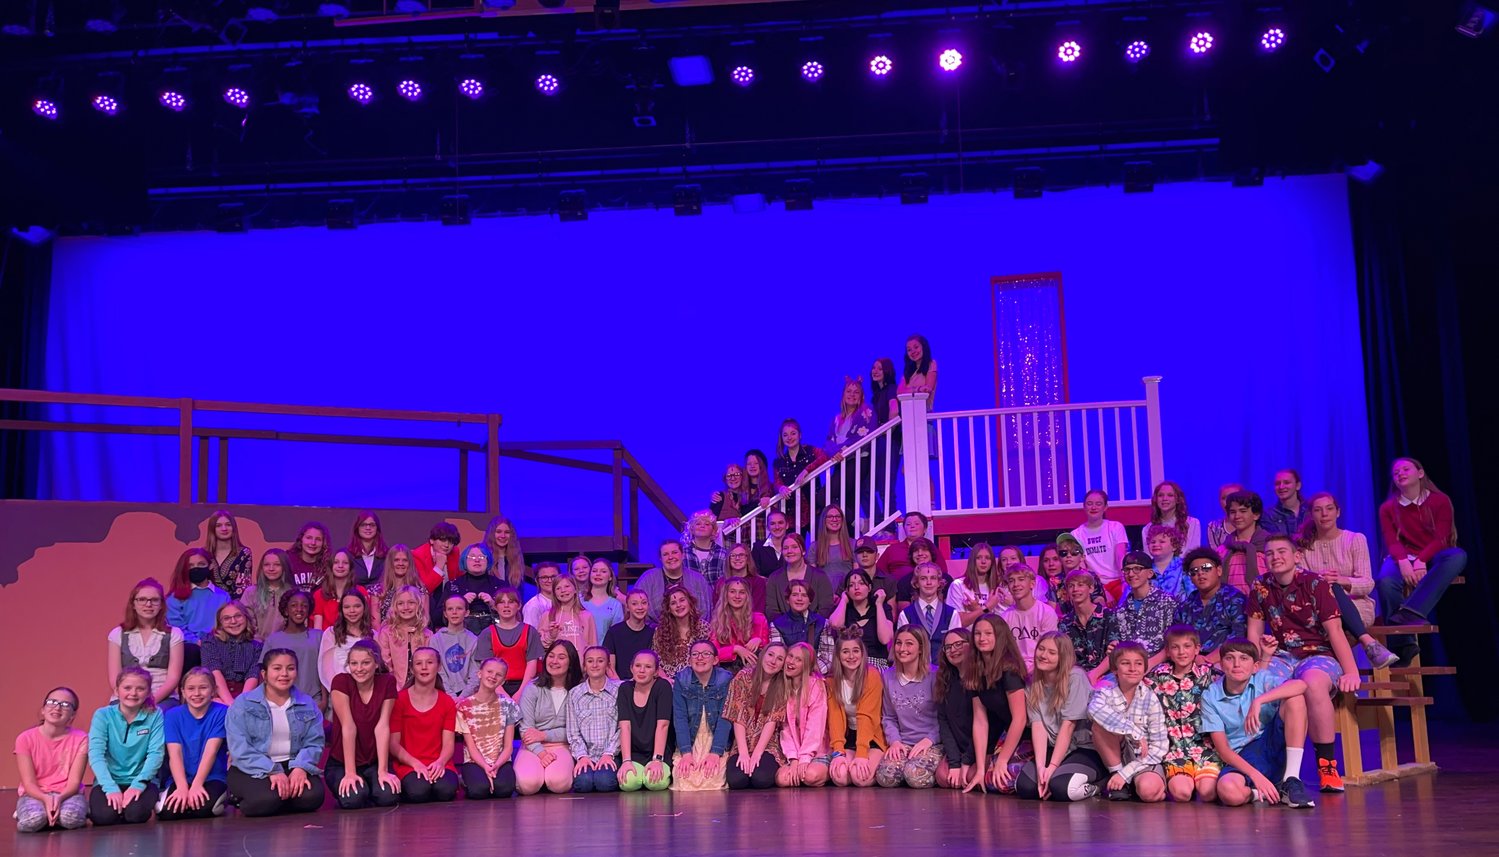 The cast of North Montgomery Middle School’s production of “Legally Blonde The Musical JR.” takes the stage this weekend at North Montgomery High School.